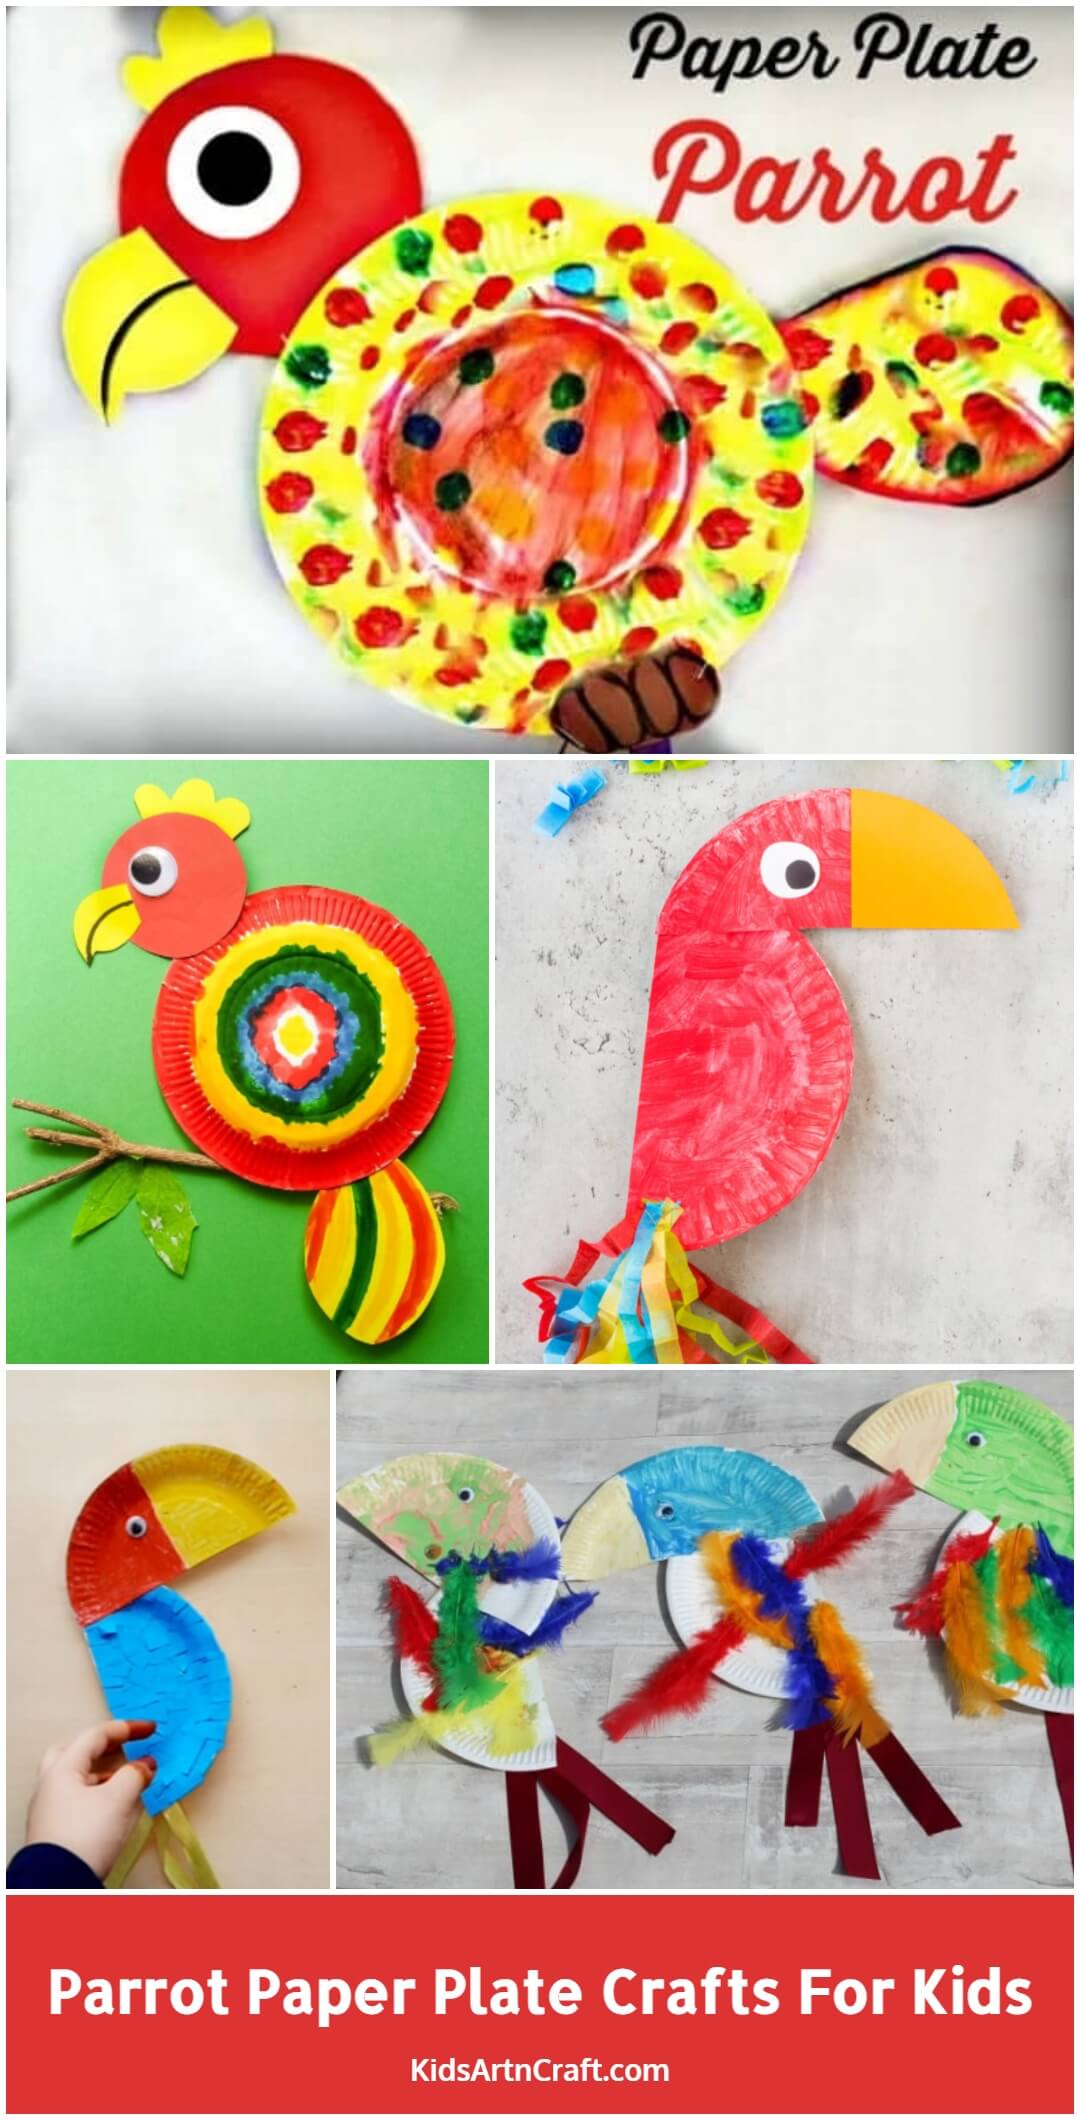 Parrot Paper Plate Crafts for Kids